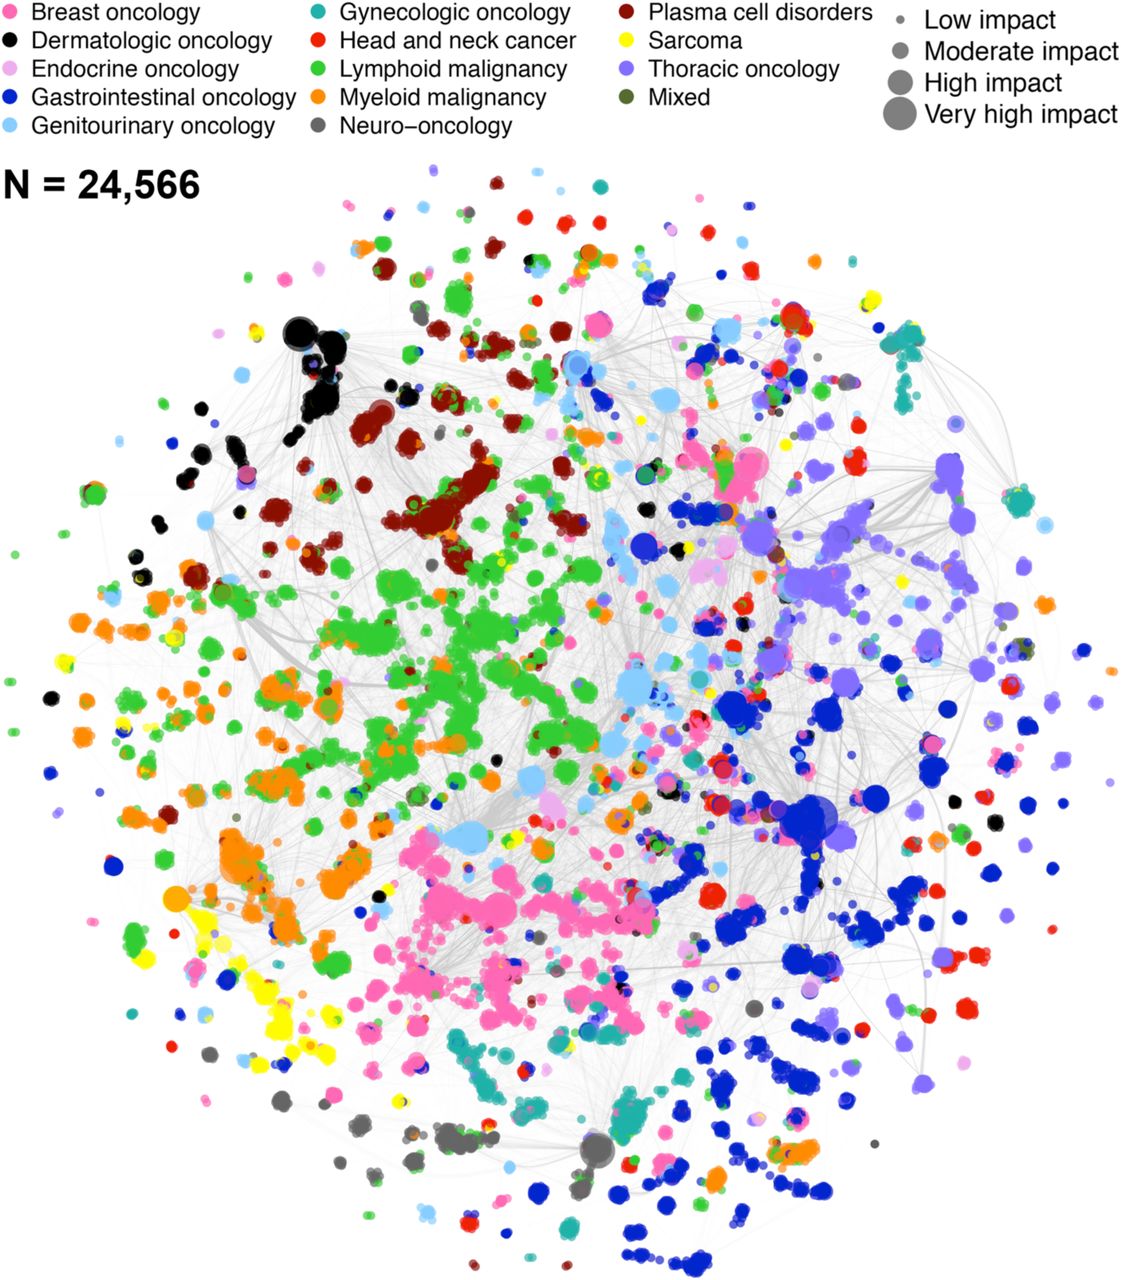 Seven Decades Of Chemotherapy Clinical Trials A Pan Cancer Social Network Analysis Medrxiv